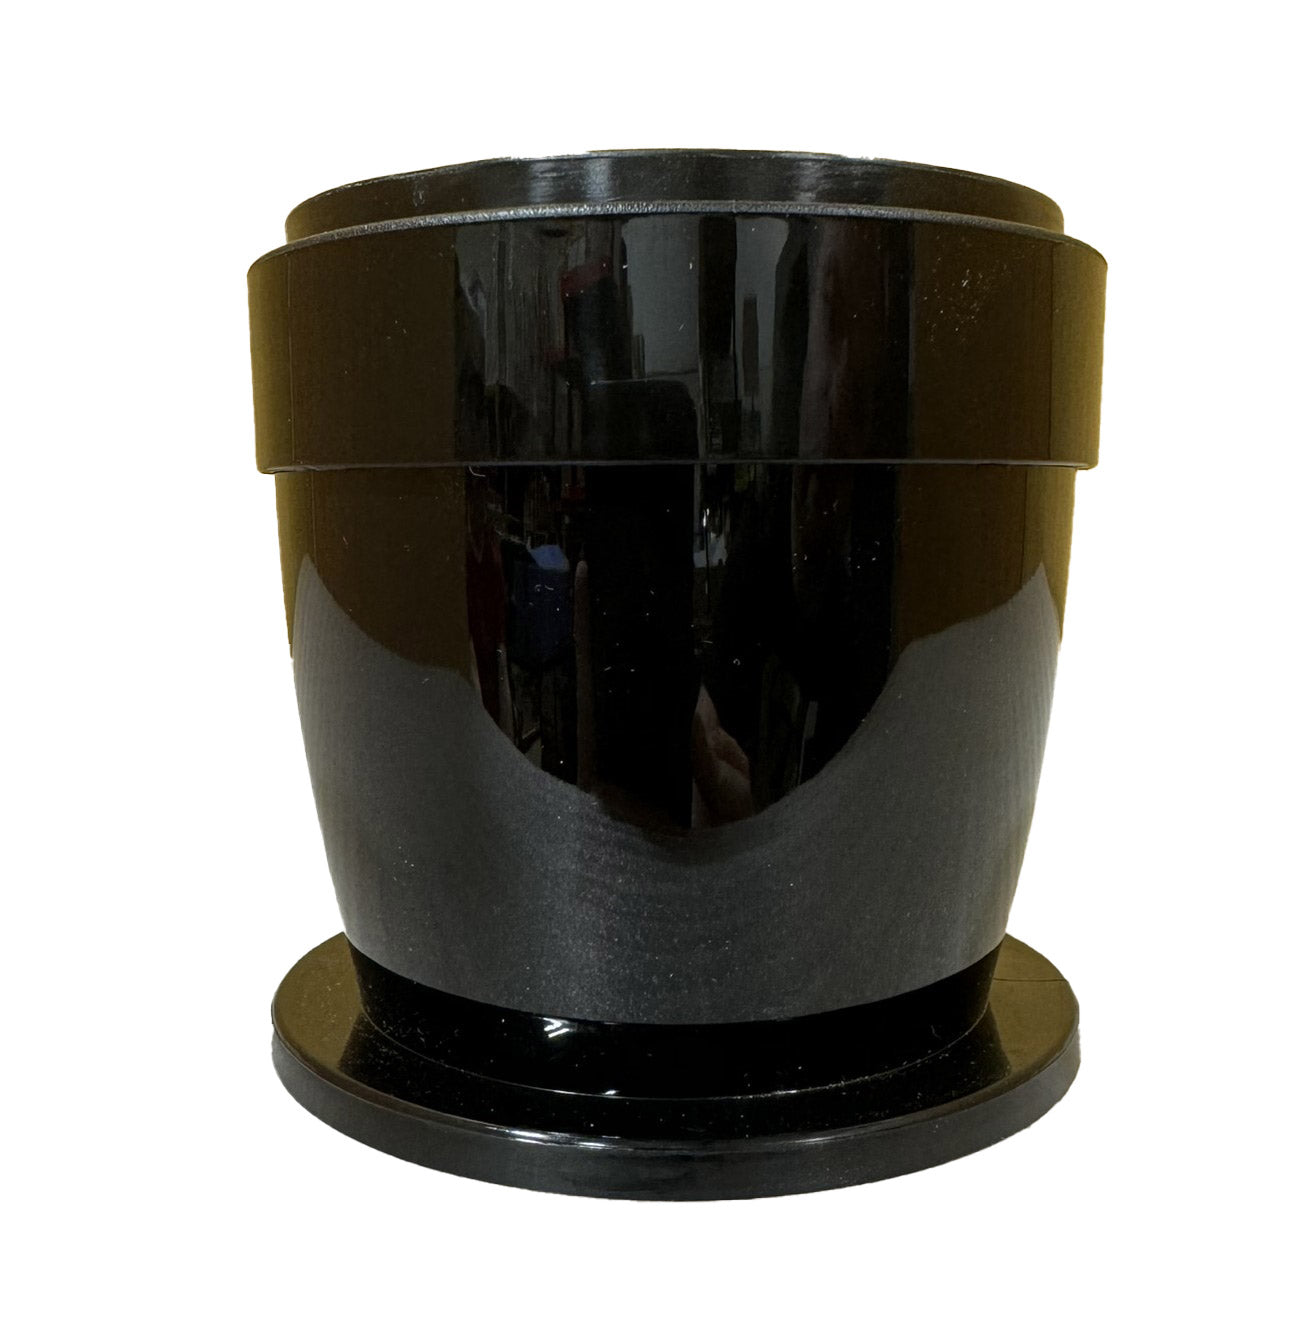 Designandgrace Coffee-4-me™ Single Cup Sustainable Gold Coffee Filter